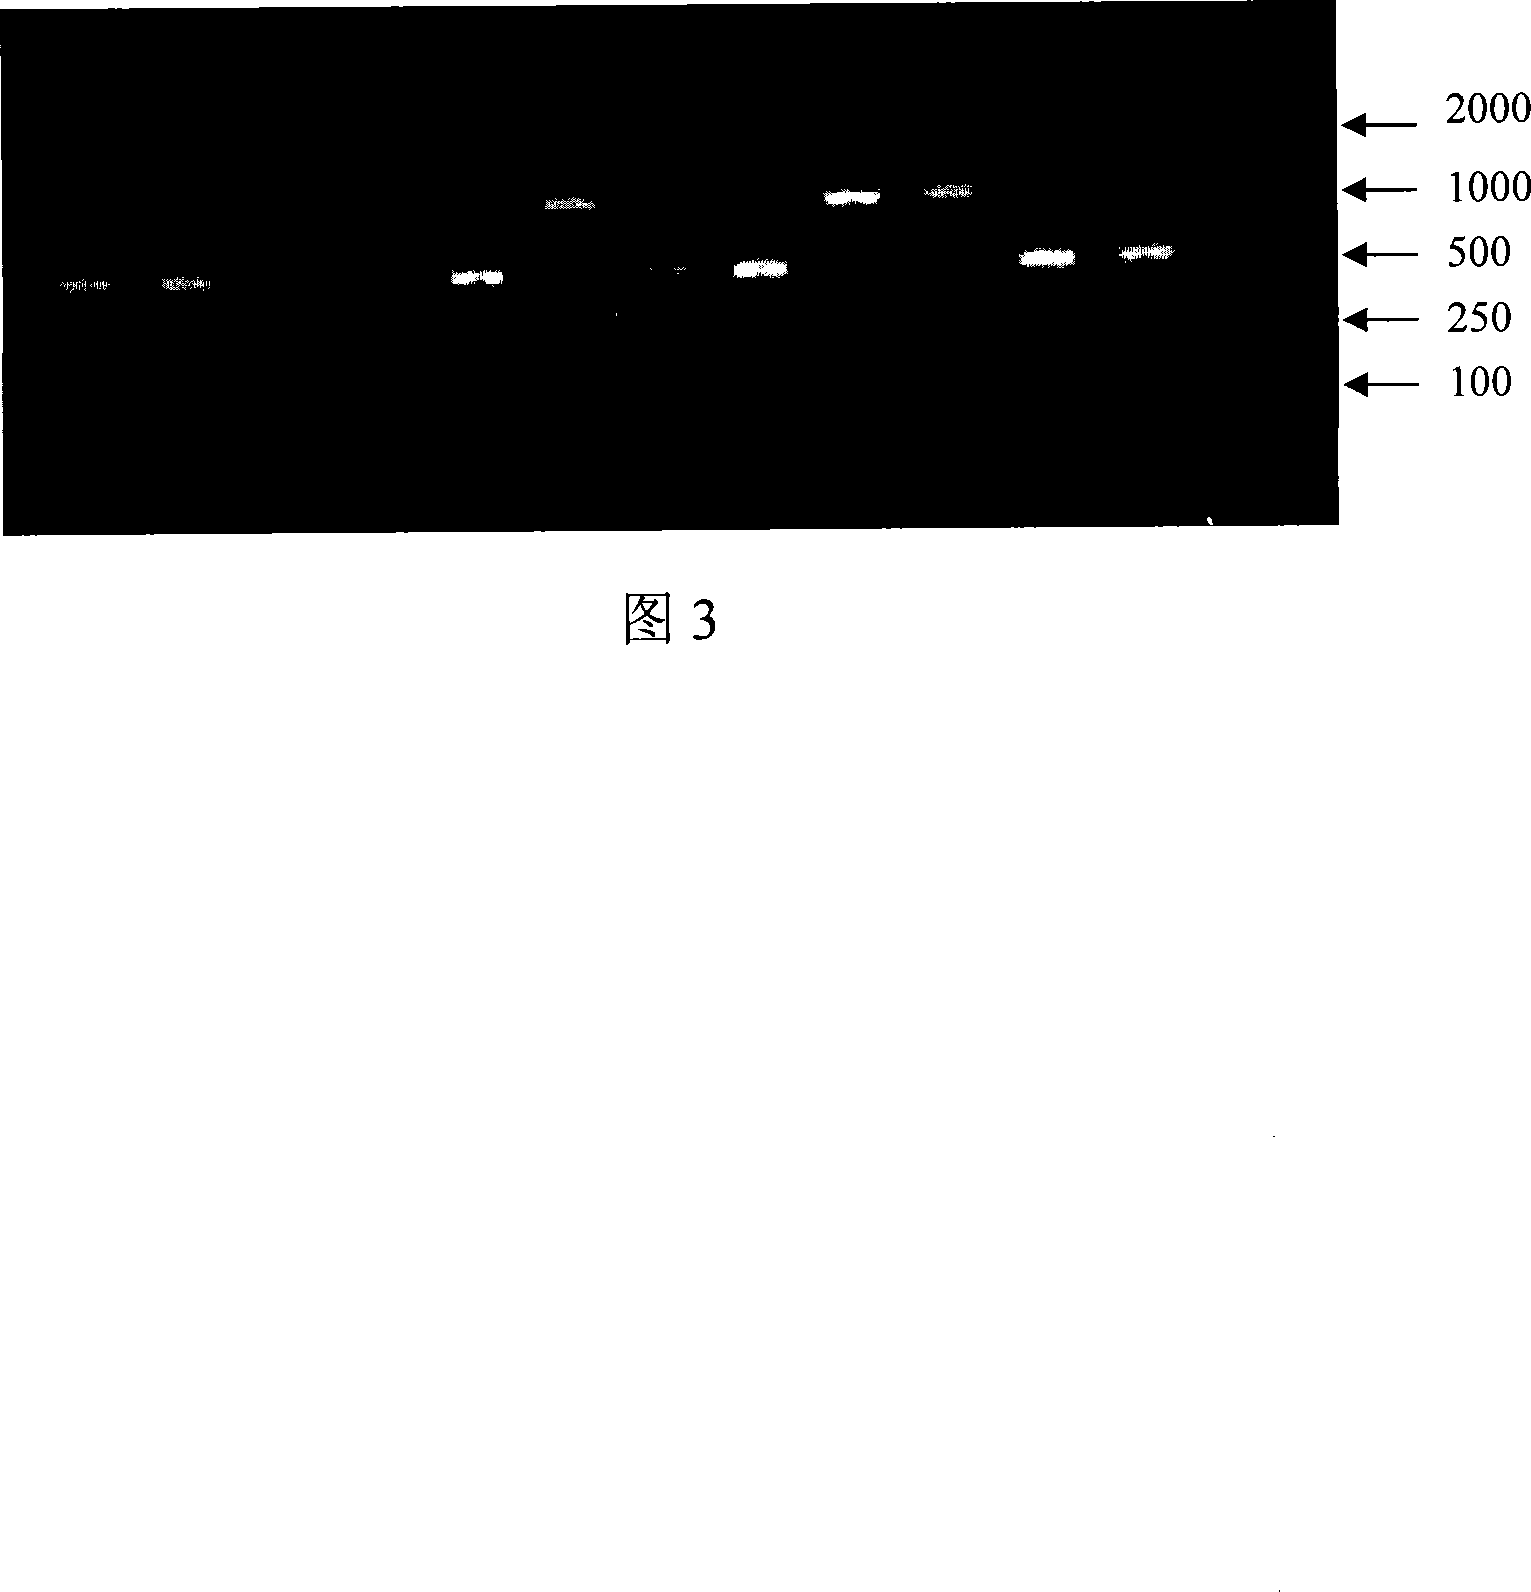 Method for preparing shikimic acid using biosynthesis technology and engineered bacteria